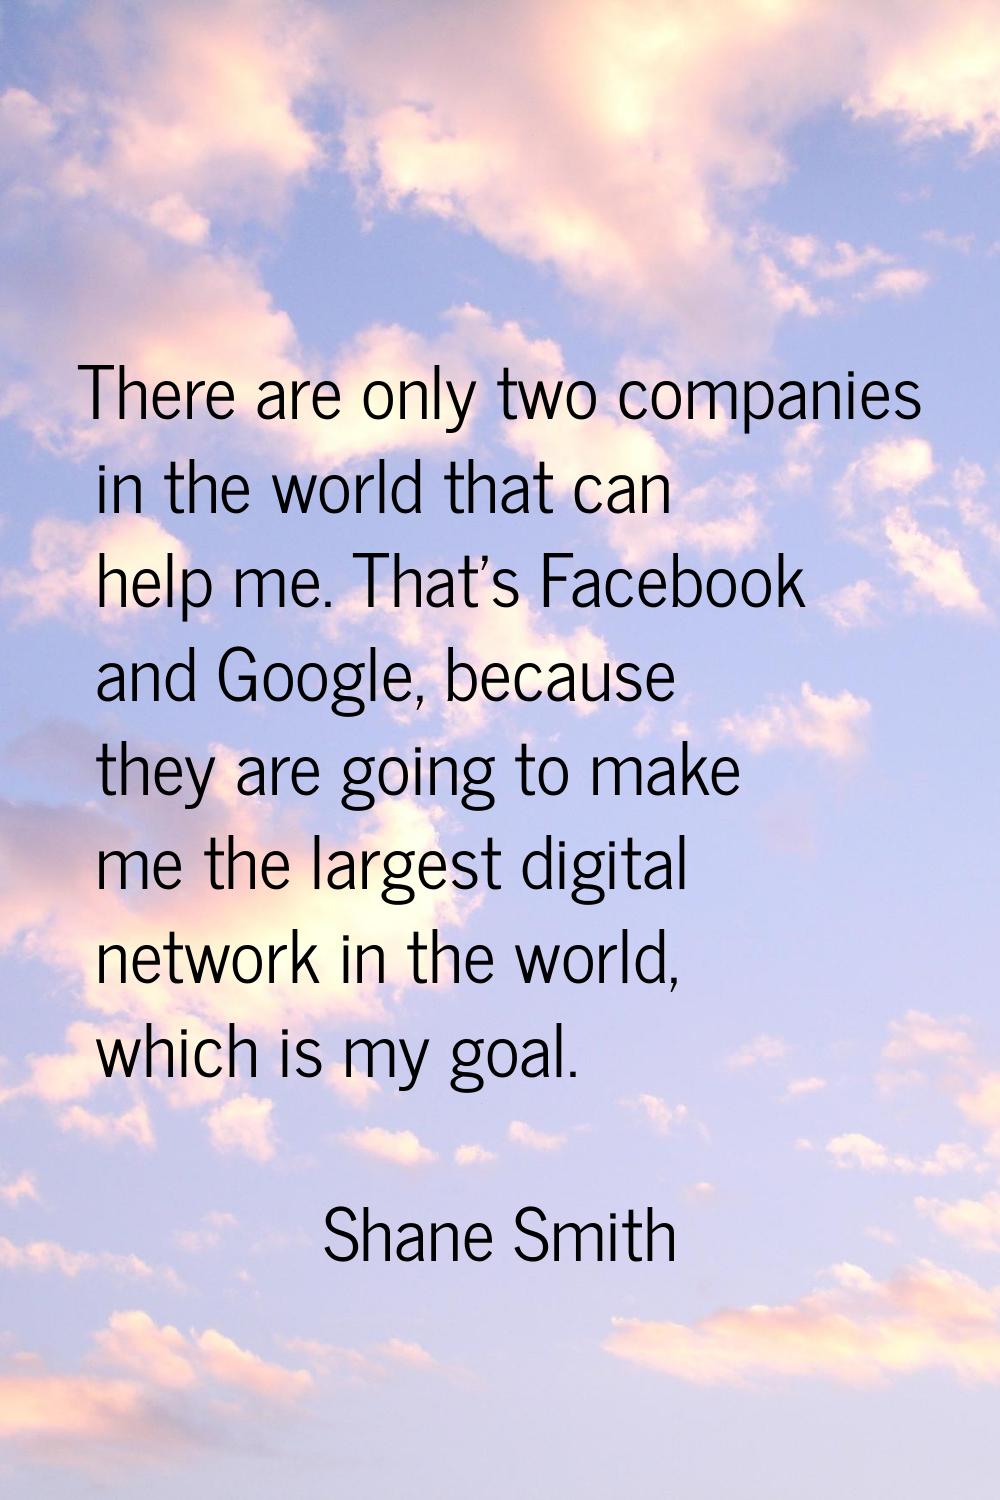 There are only two companies in the world that can help me. That's Facebook and Google, because the